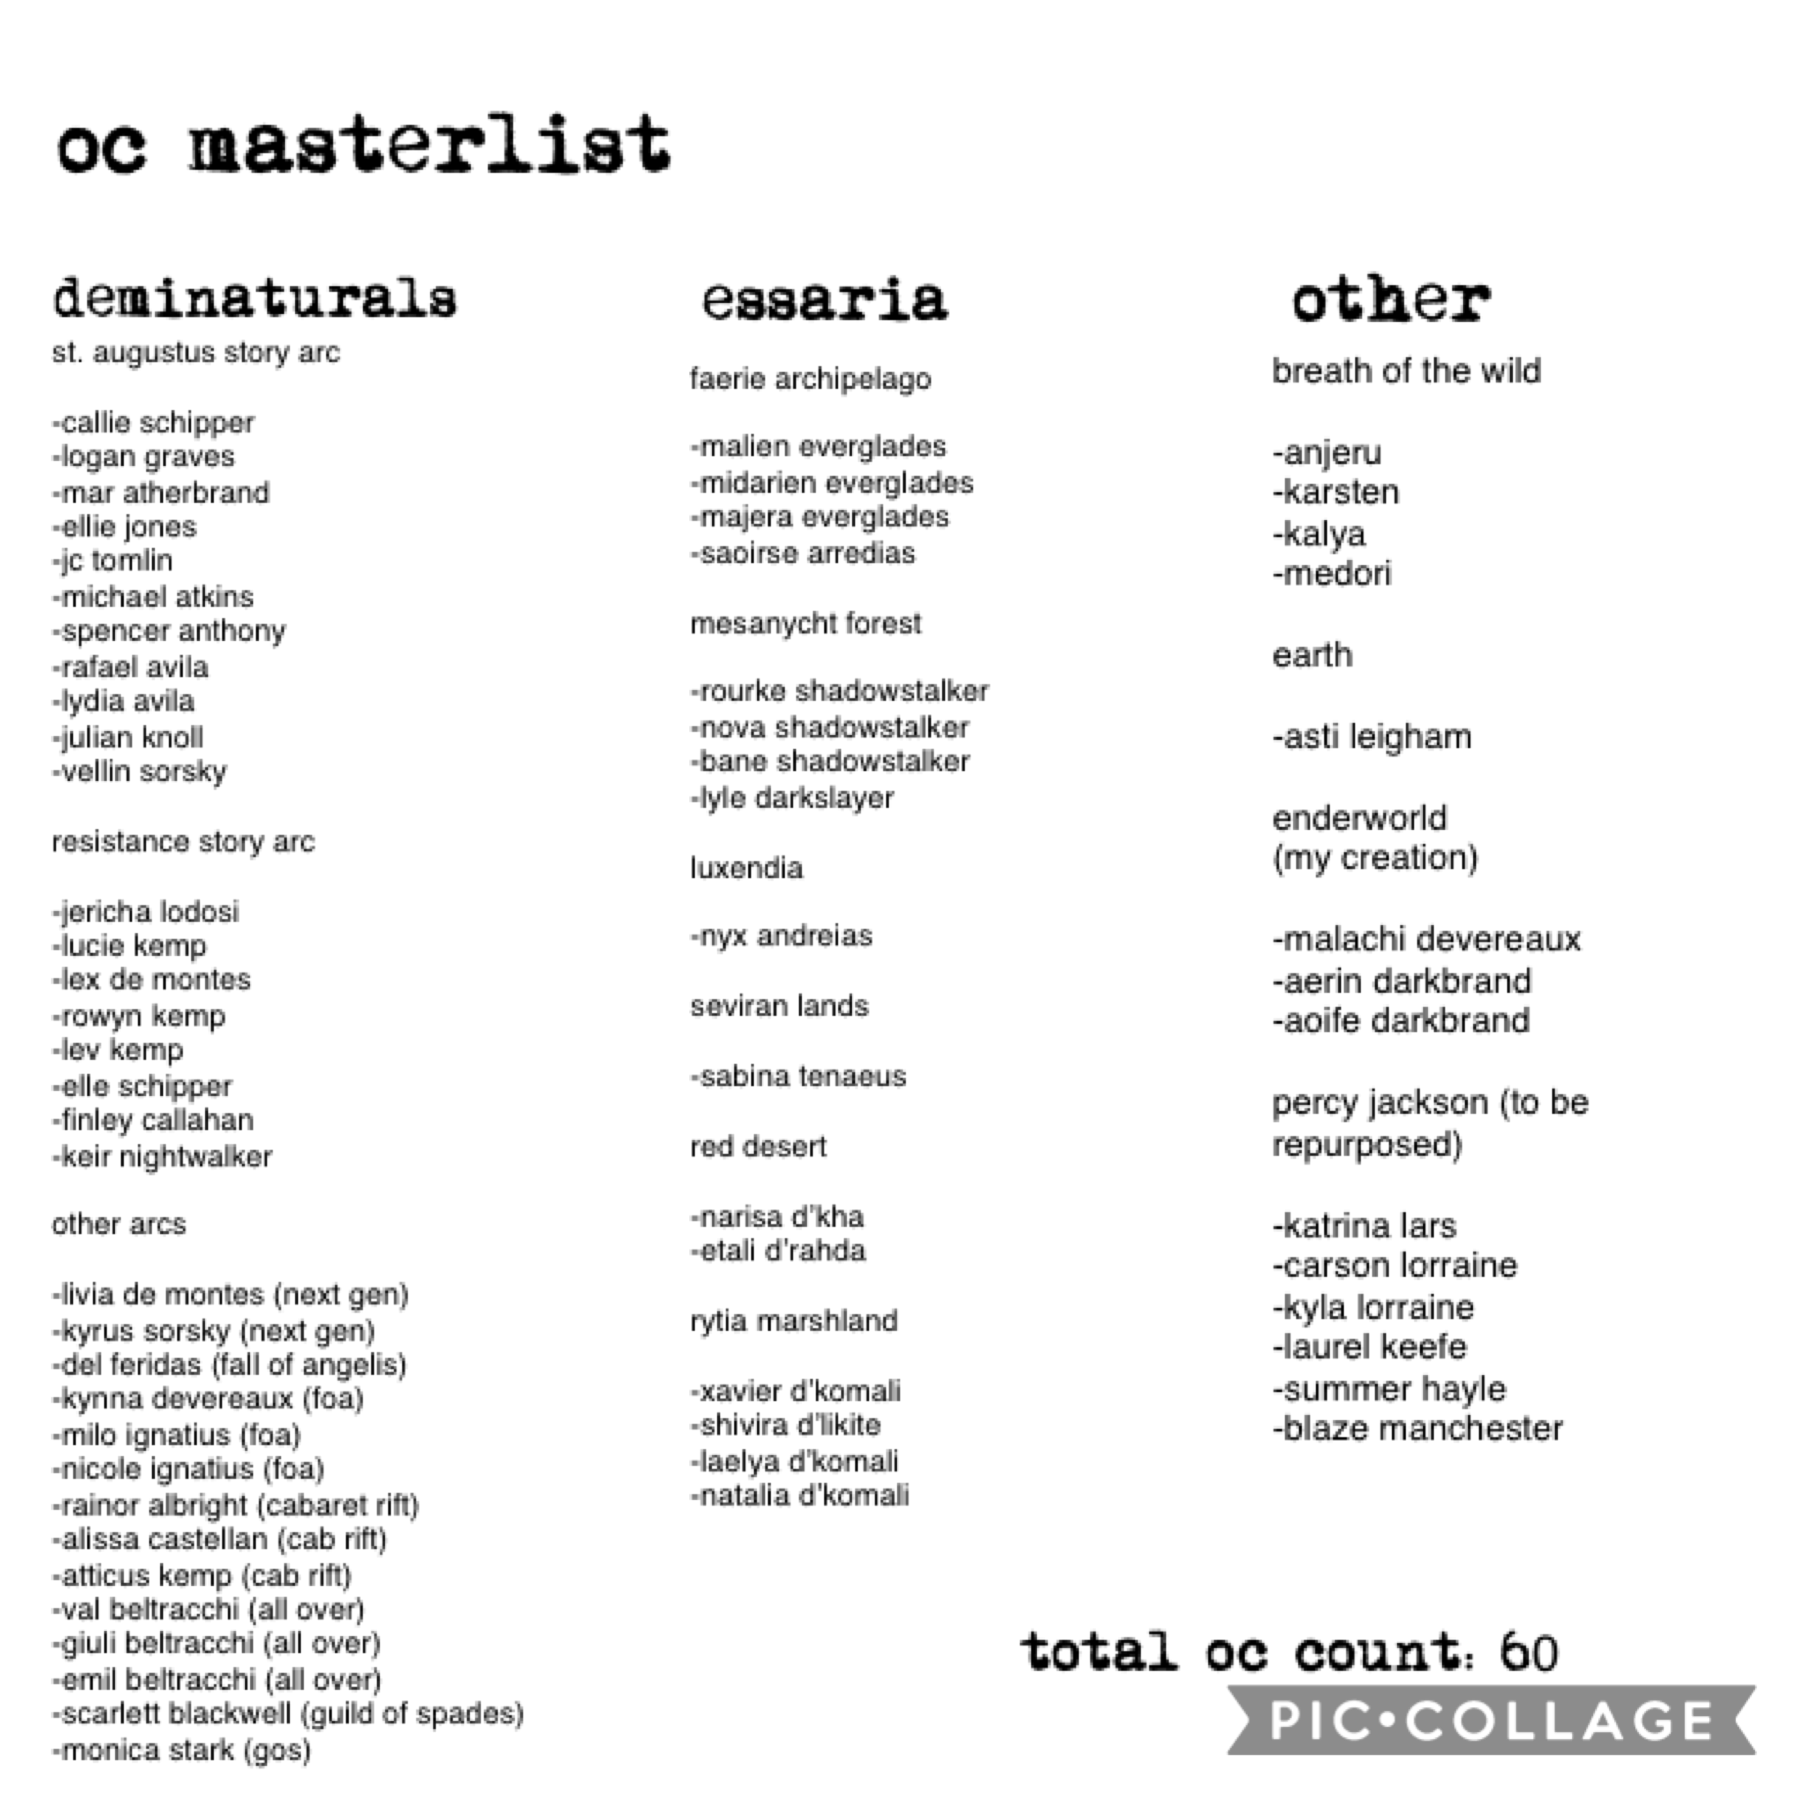 uh waddup (tap)

here’s a list of all 60(!) of my OCs! I’ll put more detailed lists in the remixes with info about all of the universes and stuff :)